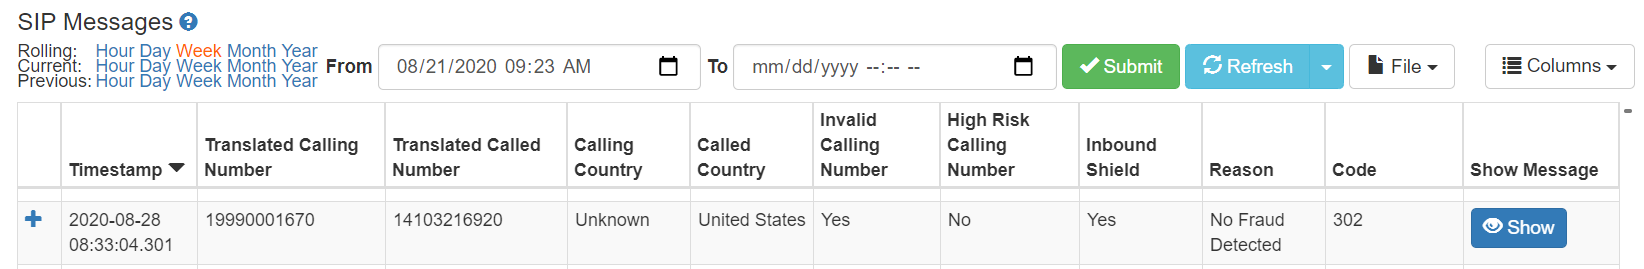 Inbound Shield call in SIP Messages